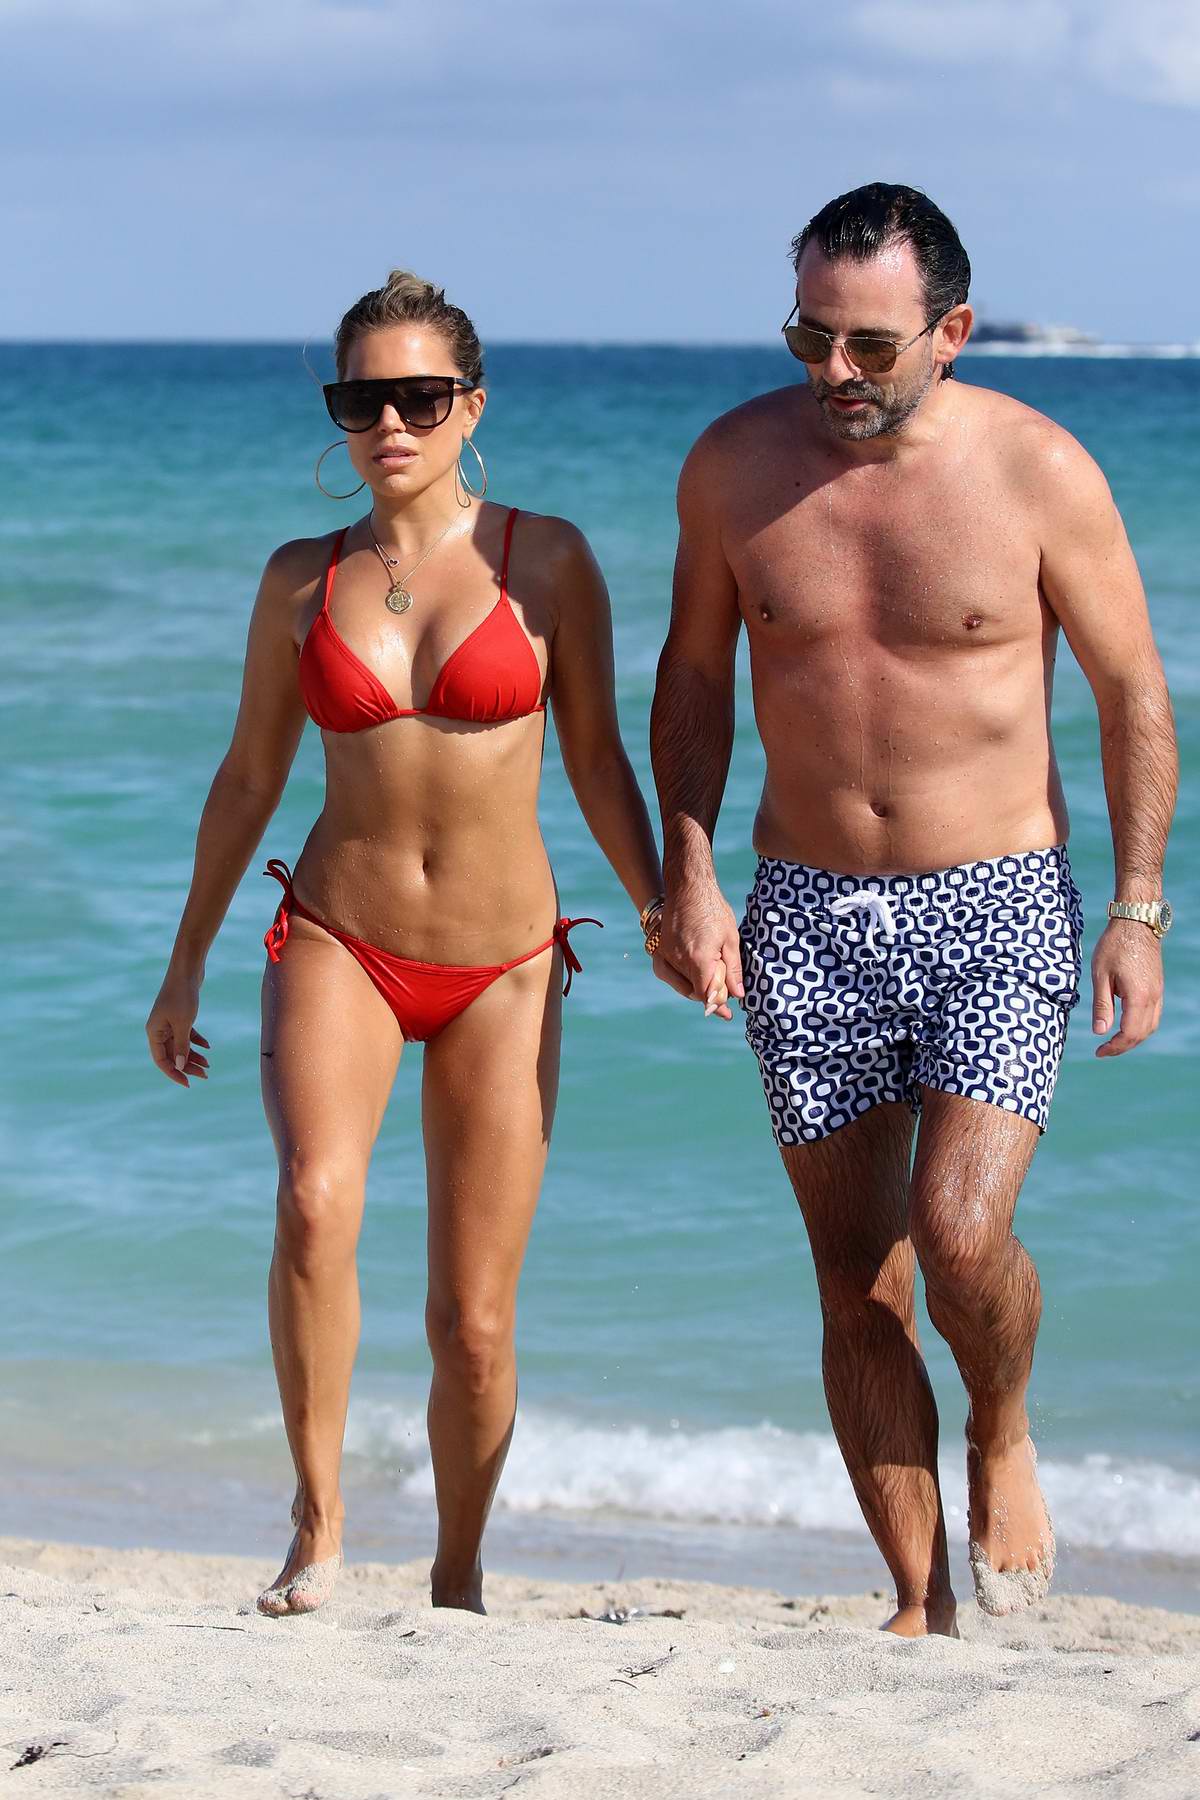 sylvie-meis-rocks-a-red-bikini-as-she-enjoys-another-relaxing-day-with-niclas-castello-at-the-beach-in-miami-florida-011219_9.jpg